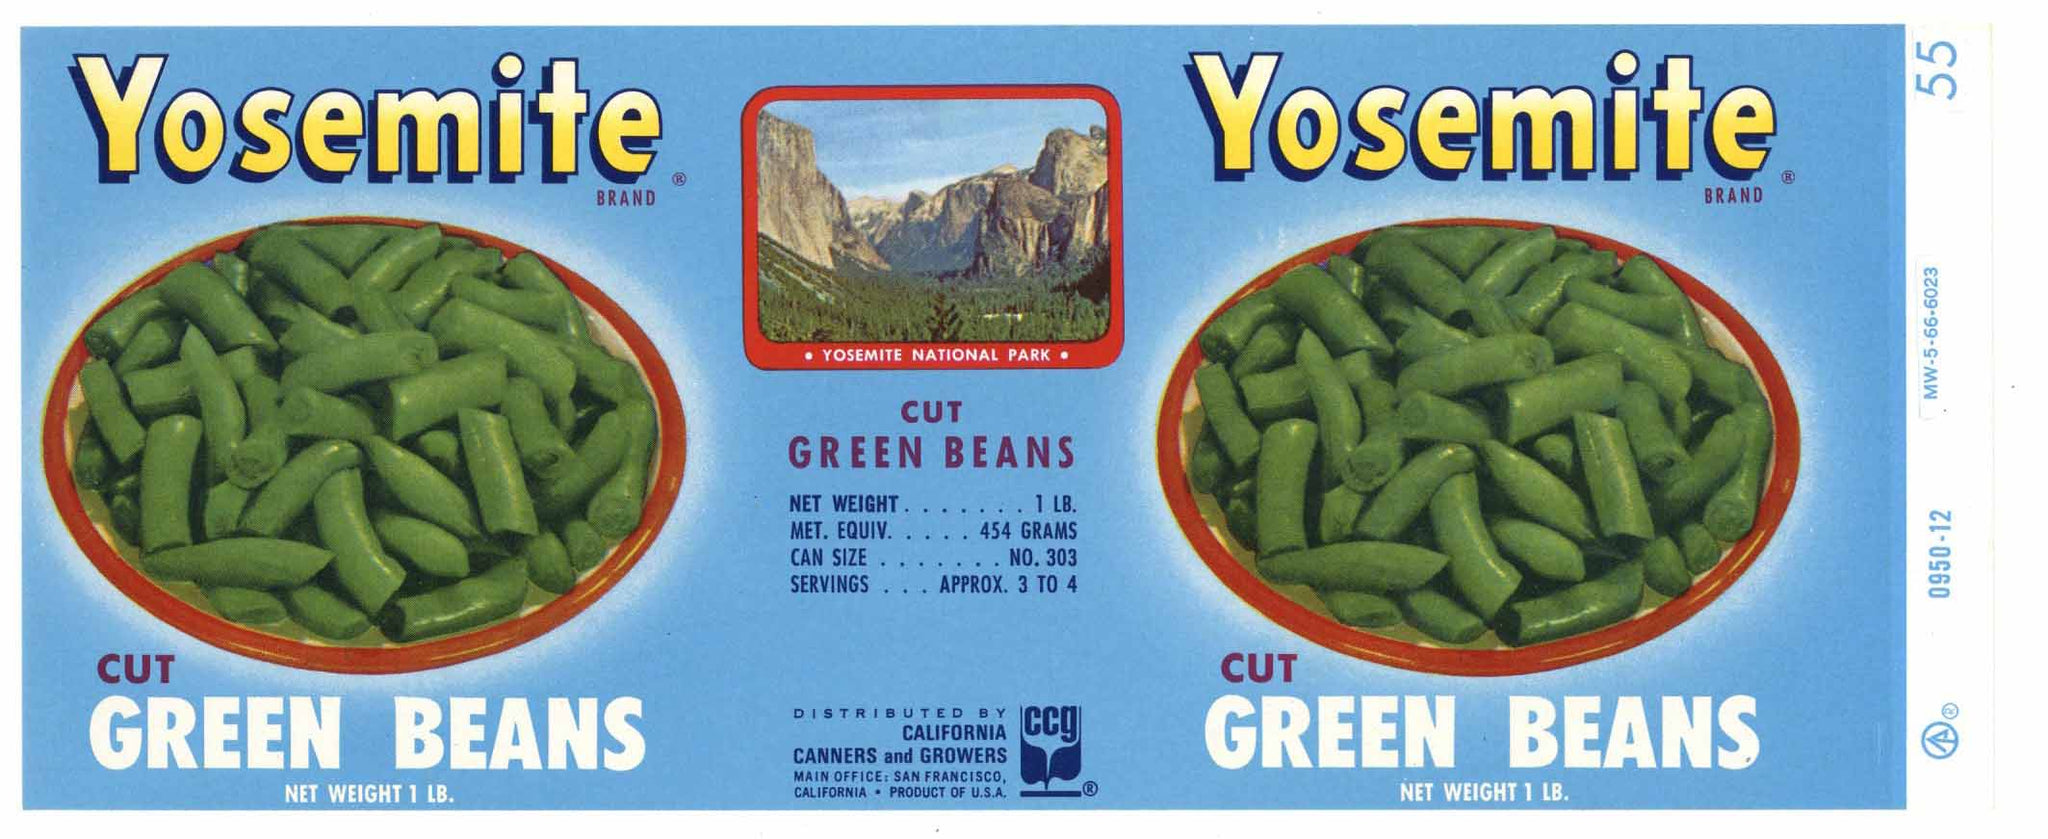 Yosemite Brand Vintage Green Beans Can Label